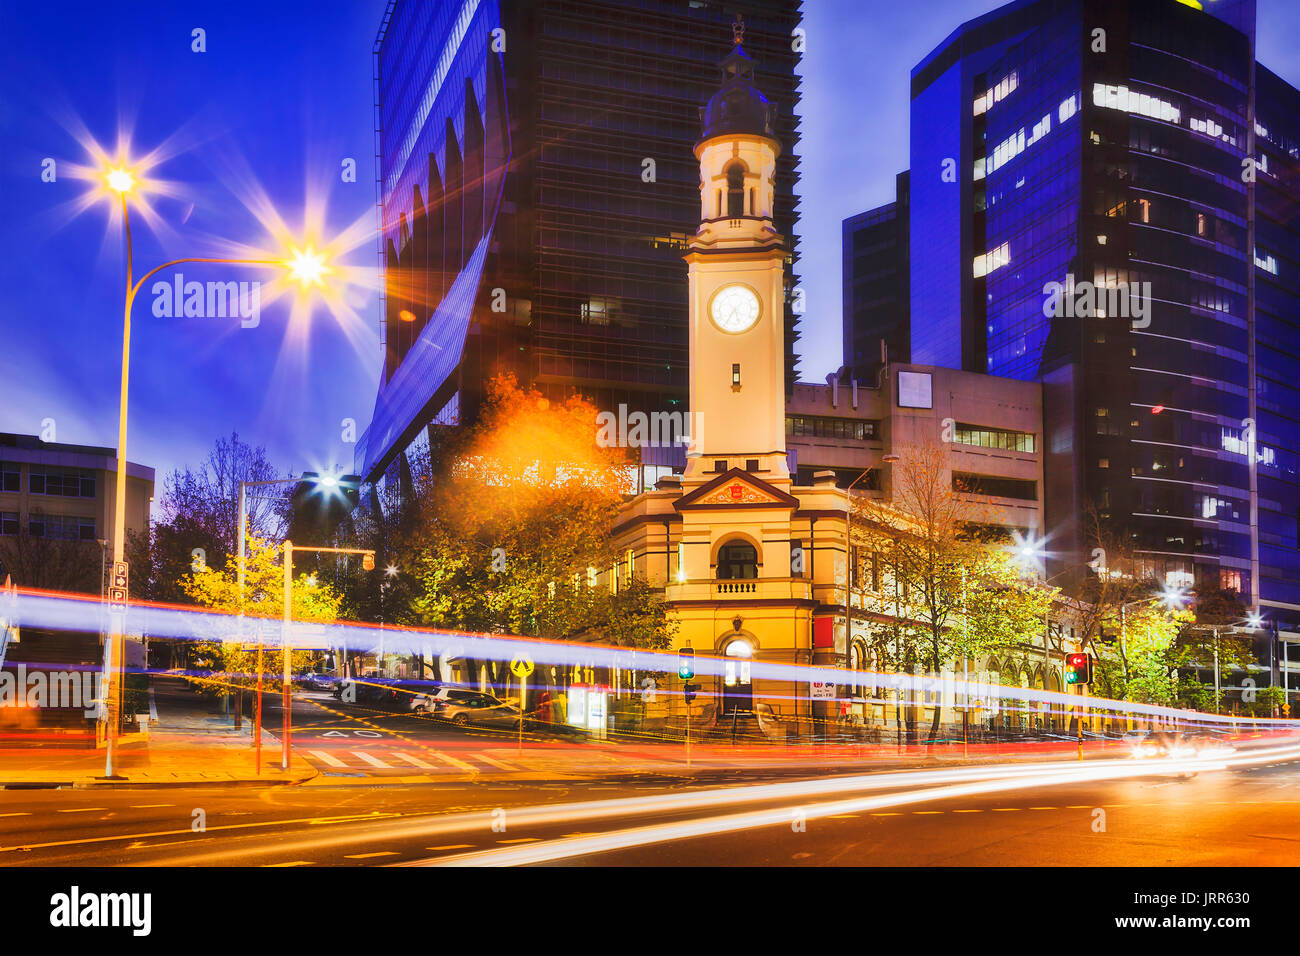 Historic heritage North Sydney post office building with clock tower against tall modern business high-rises at sunset on car traffic street. Stock Photo